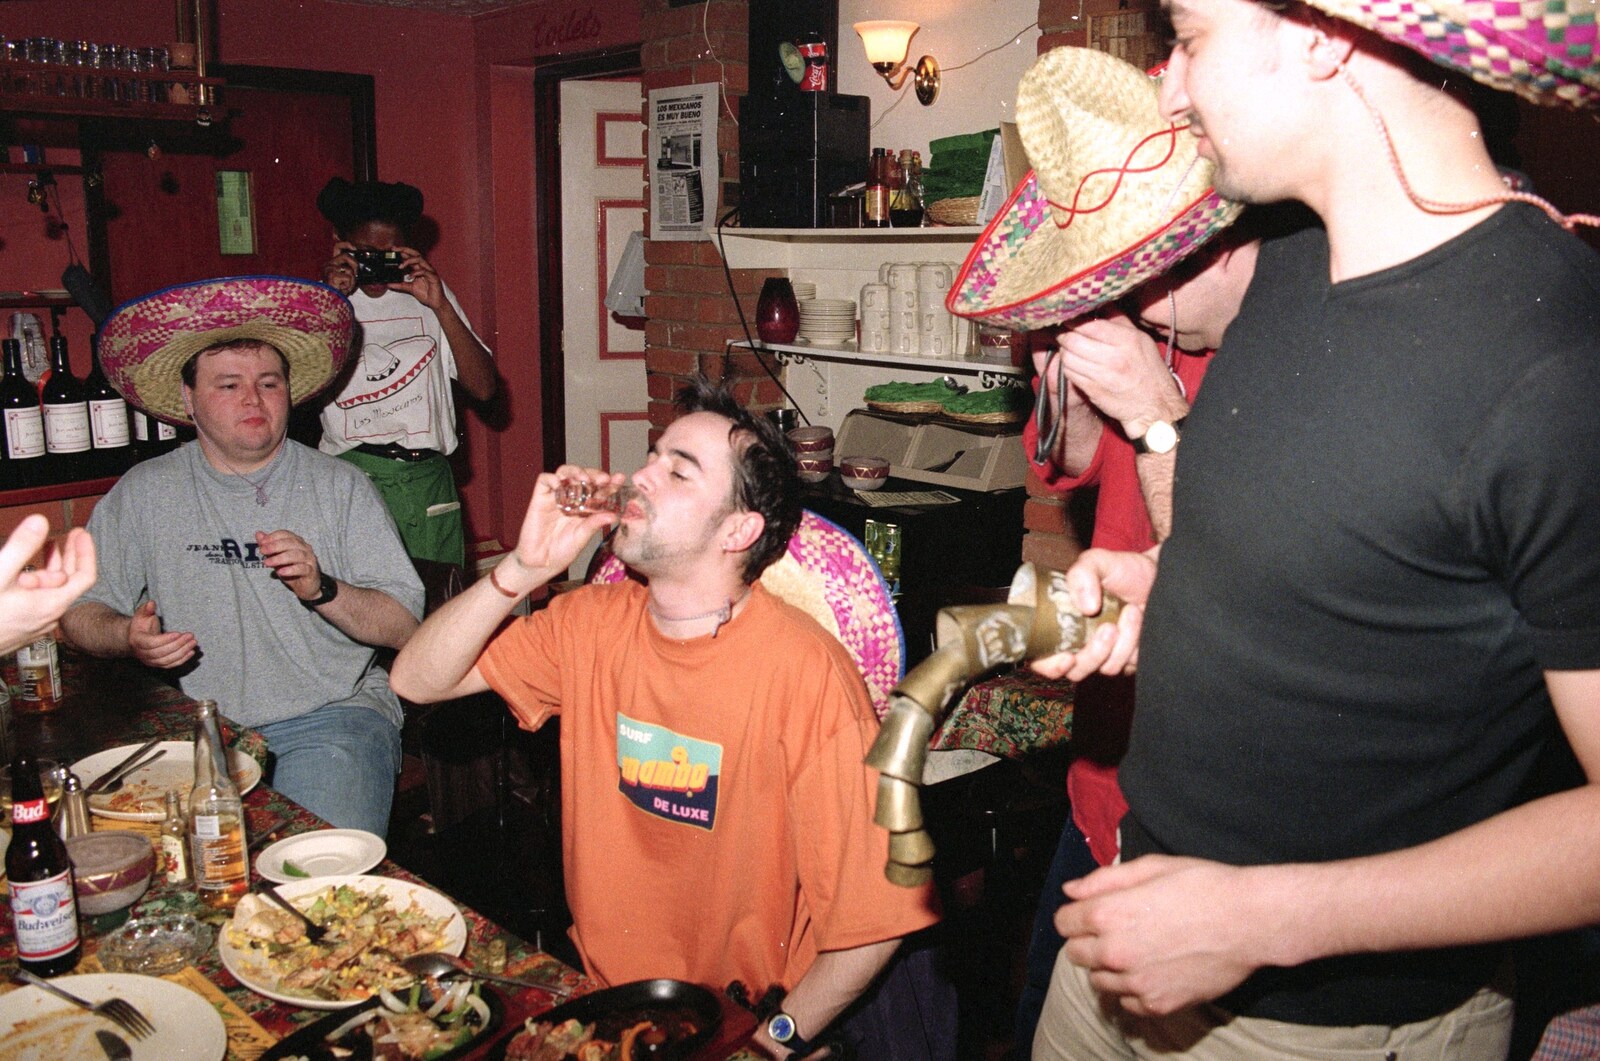 CISU, Los Mexicanos and the Inflatable Woman, Ipswich, Suffolk - 25th April 1996: Trev slams more Tequila